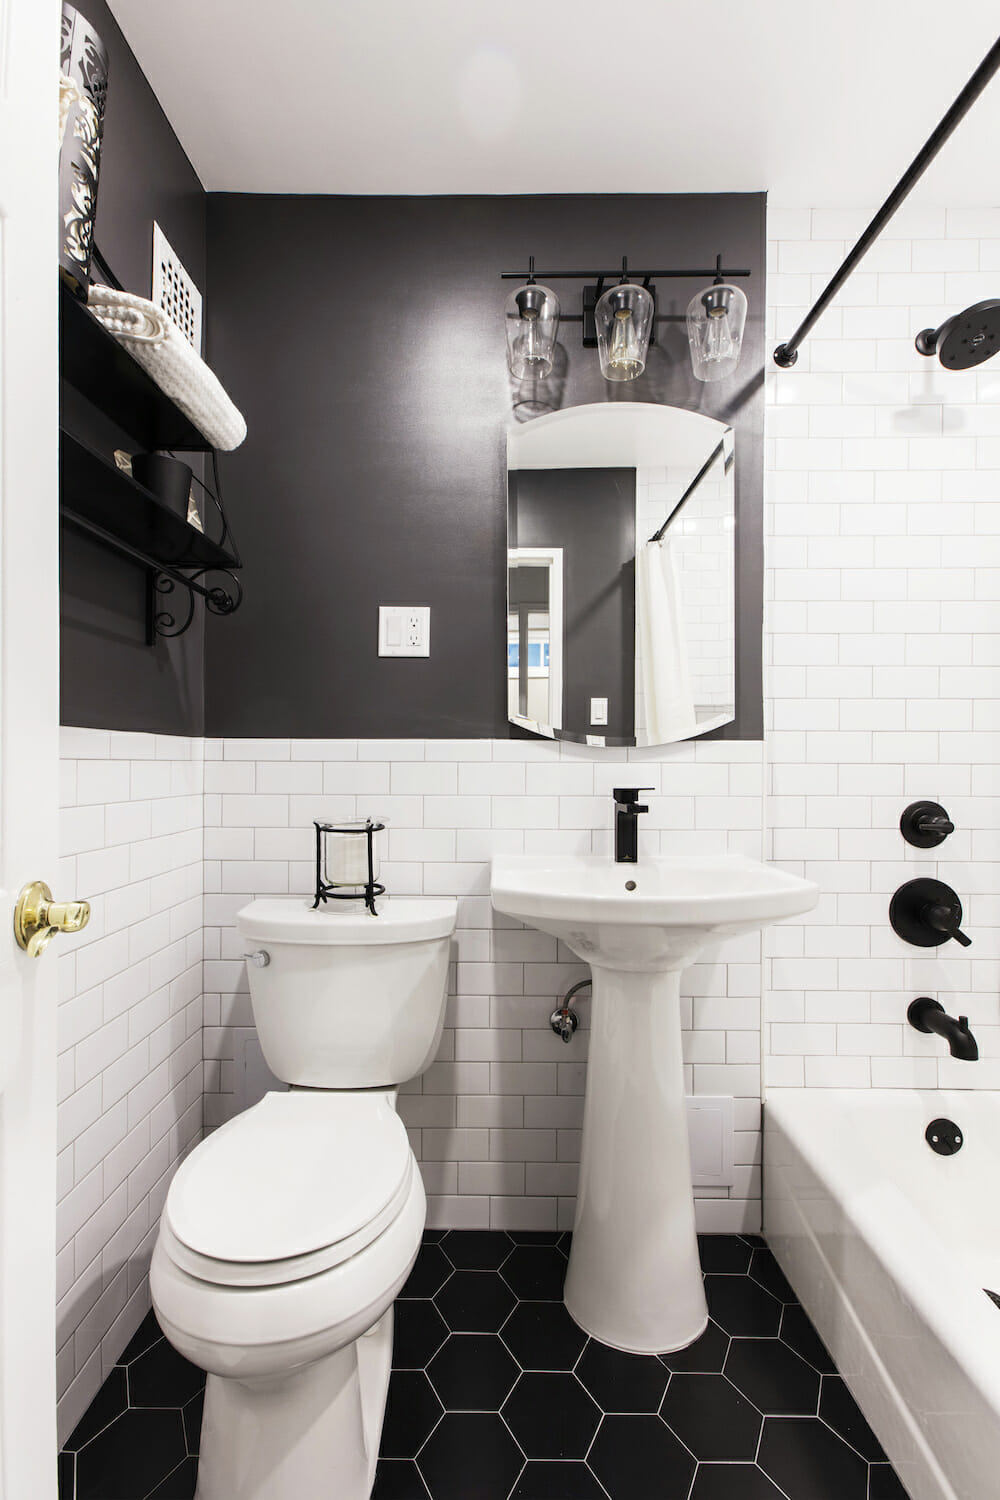 subway tiles on bathroom walls and pedastal sink and toilet and black half wall and black hexagon floor tiles and black faucets and fixtures after renovation